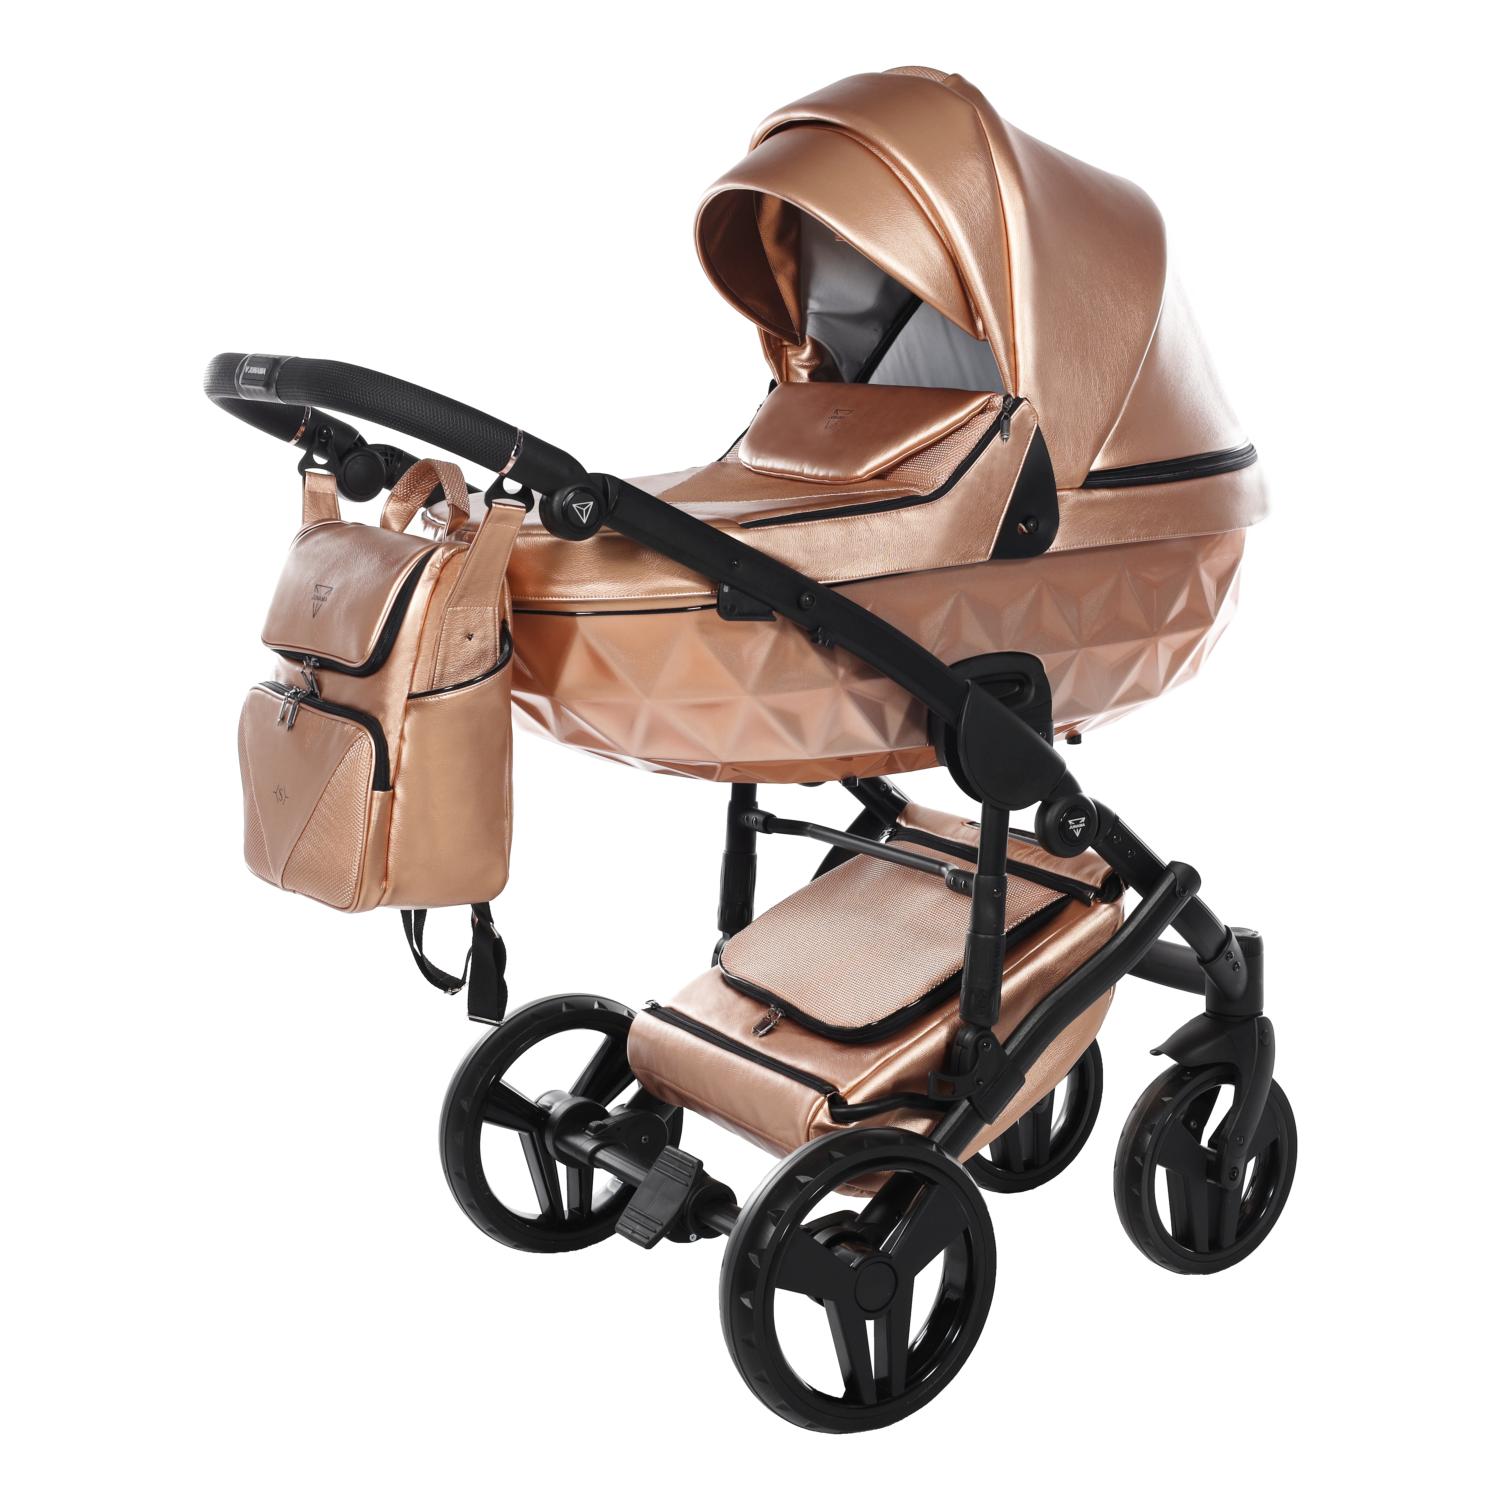 https://www.modebebe.fr/images/Image/Poussette-Duo-S-Class-Rose-gold-JUSC05.jpg